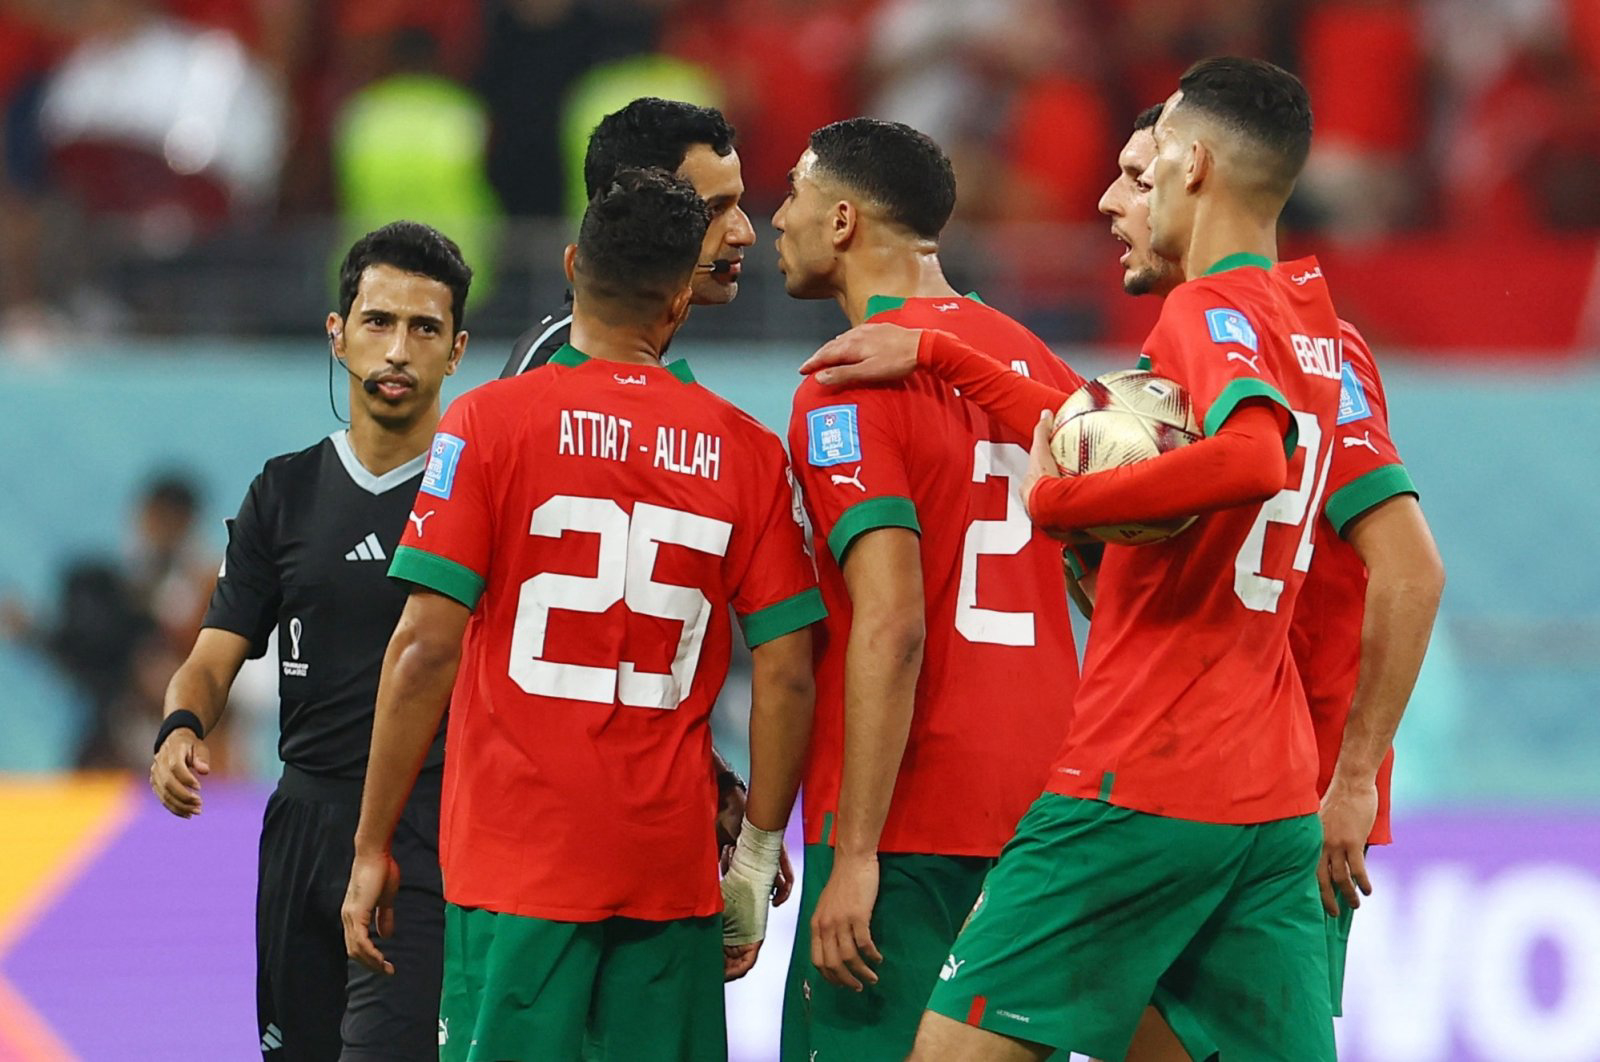 Read more about the article Morocco Football Federation Threatens to Boycott African Nations Championship | The African Exponent.